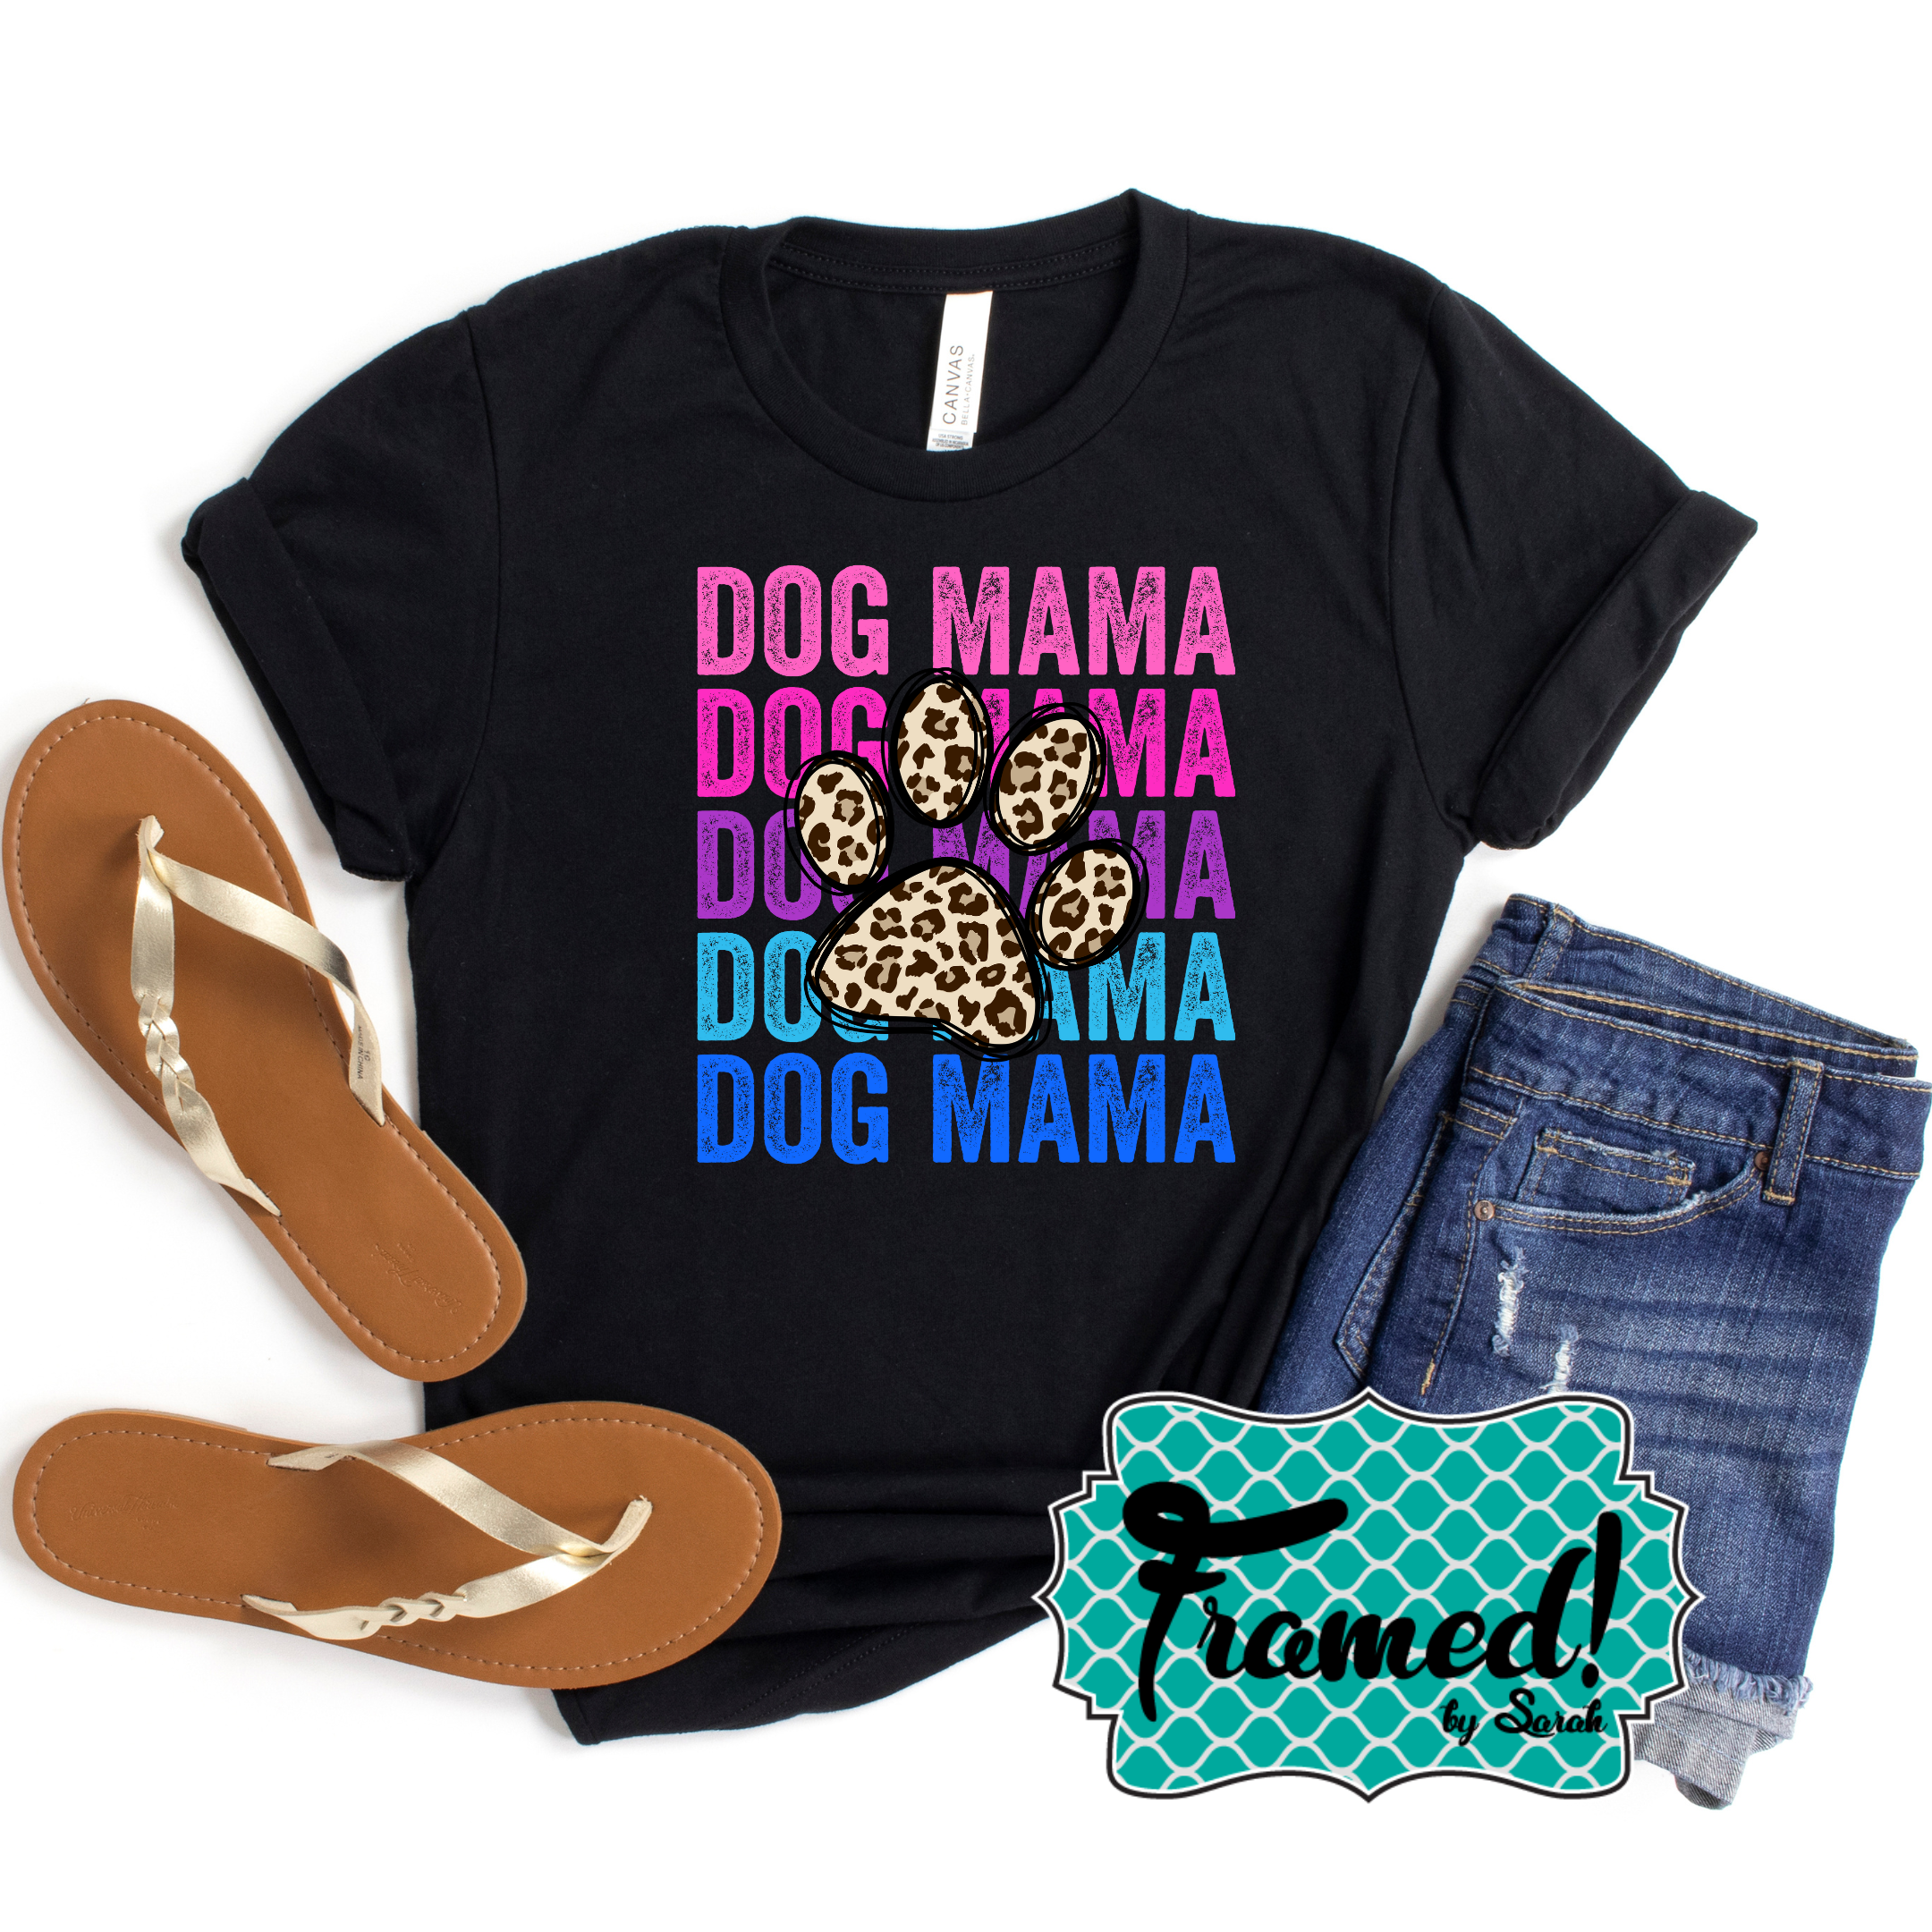 Dog Mama Graphic Tee (Small Only)